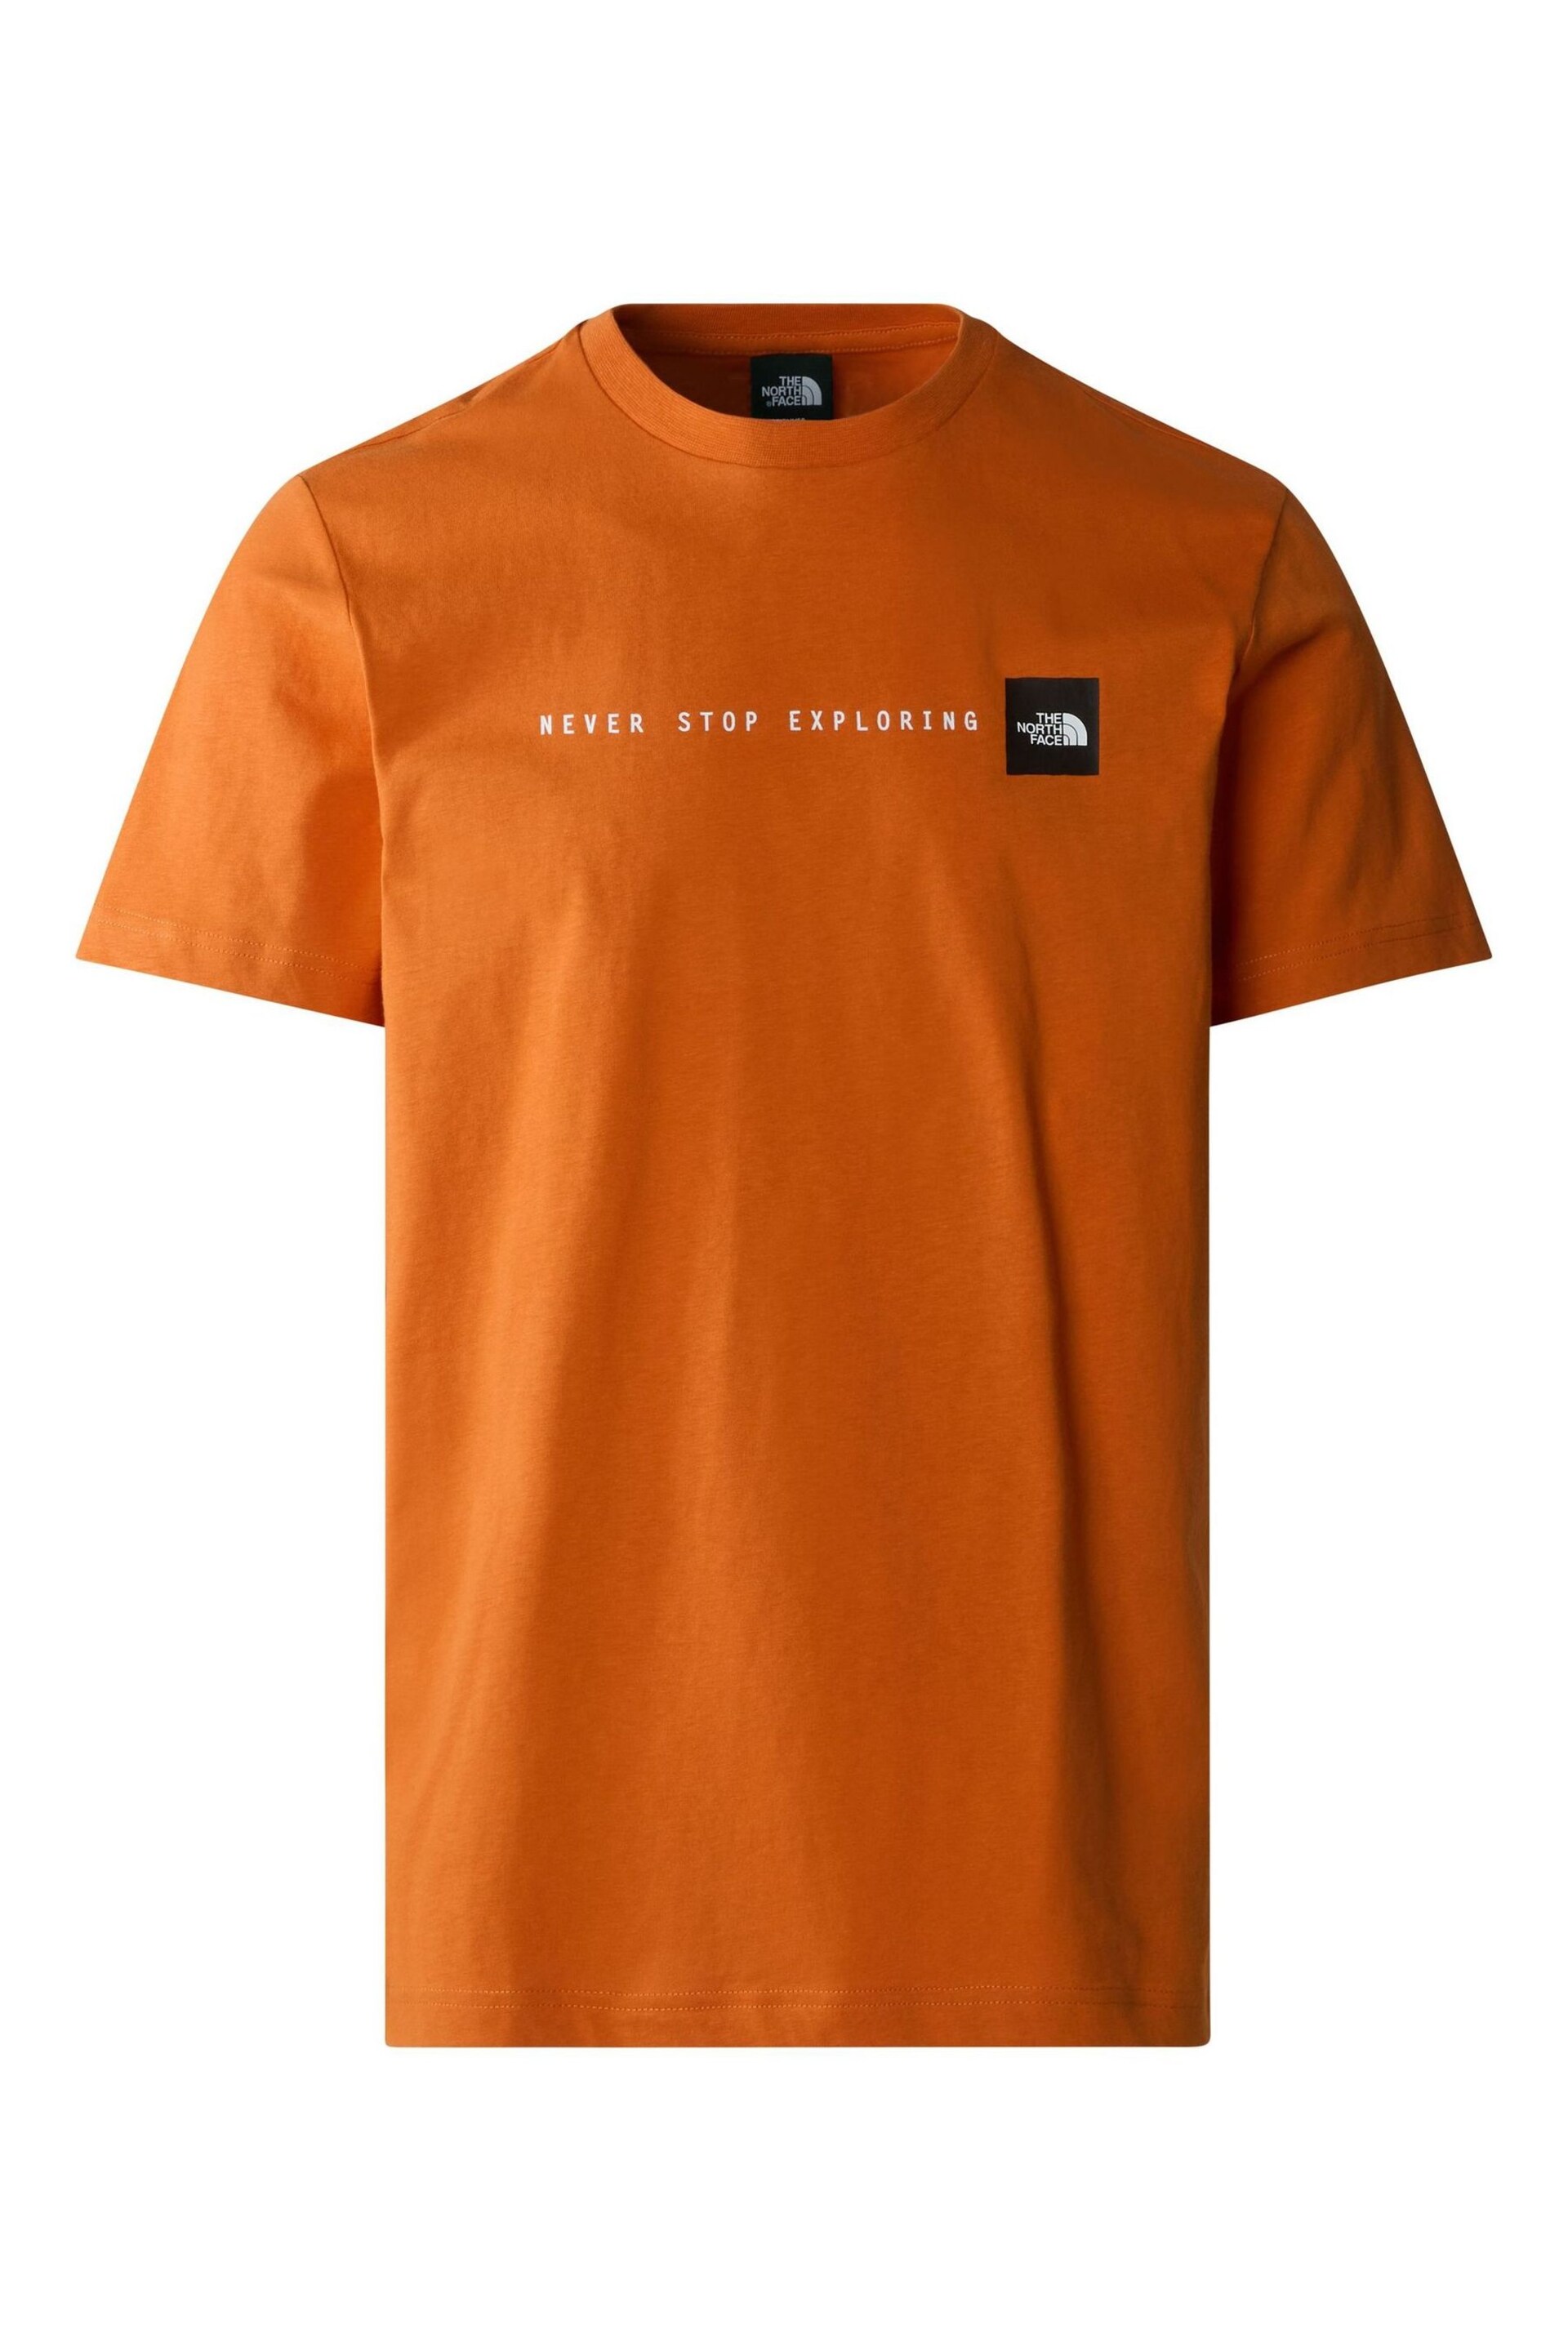 The North Face Brown Mens Never Stop Exploring Short Sleeve T-Shirt - Image 4 of 5